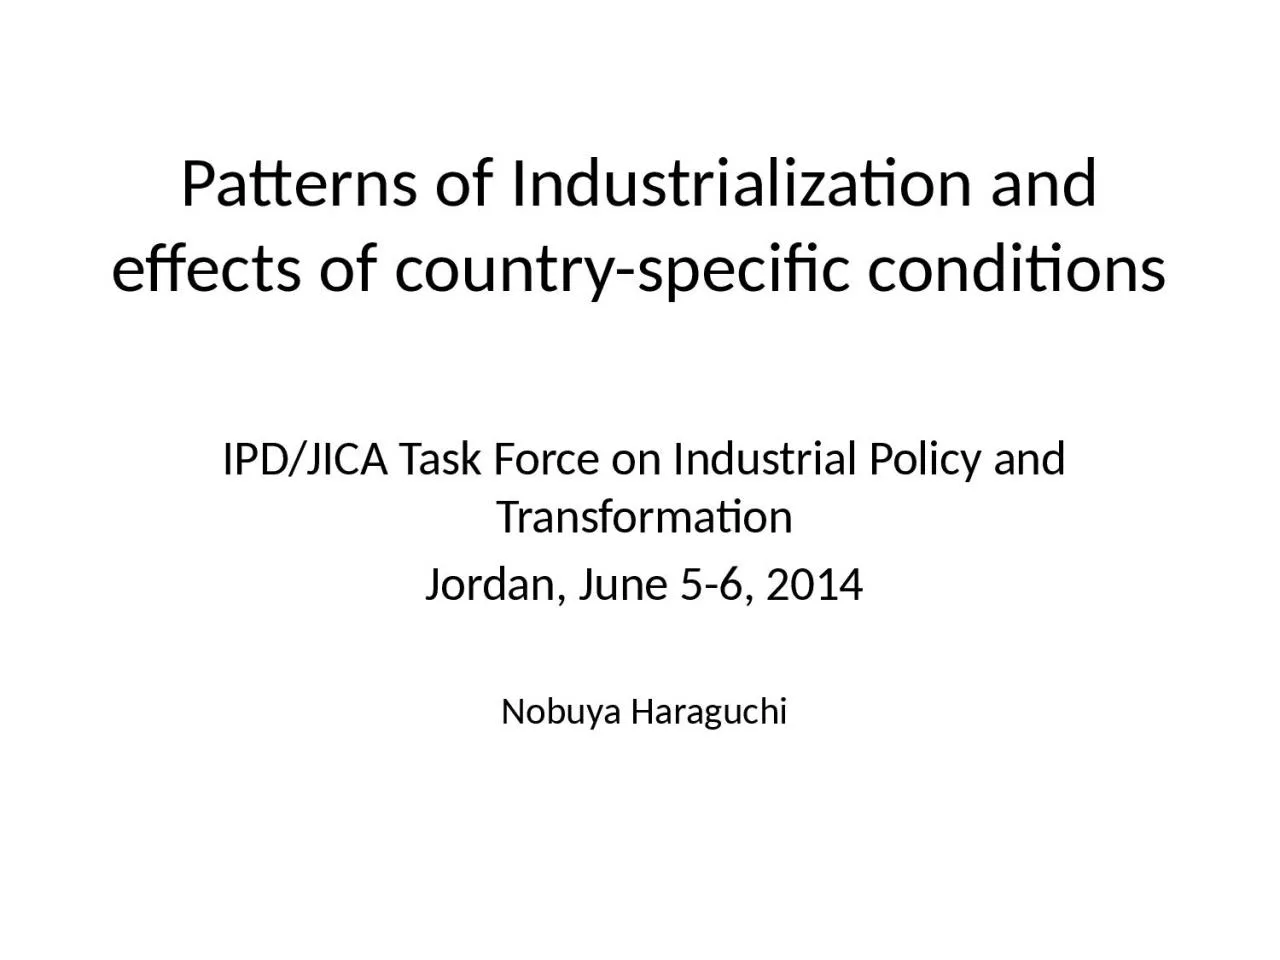 Patterns of Industrialization and effects of country-specific conditions